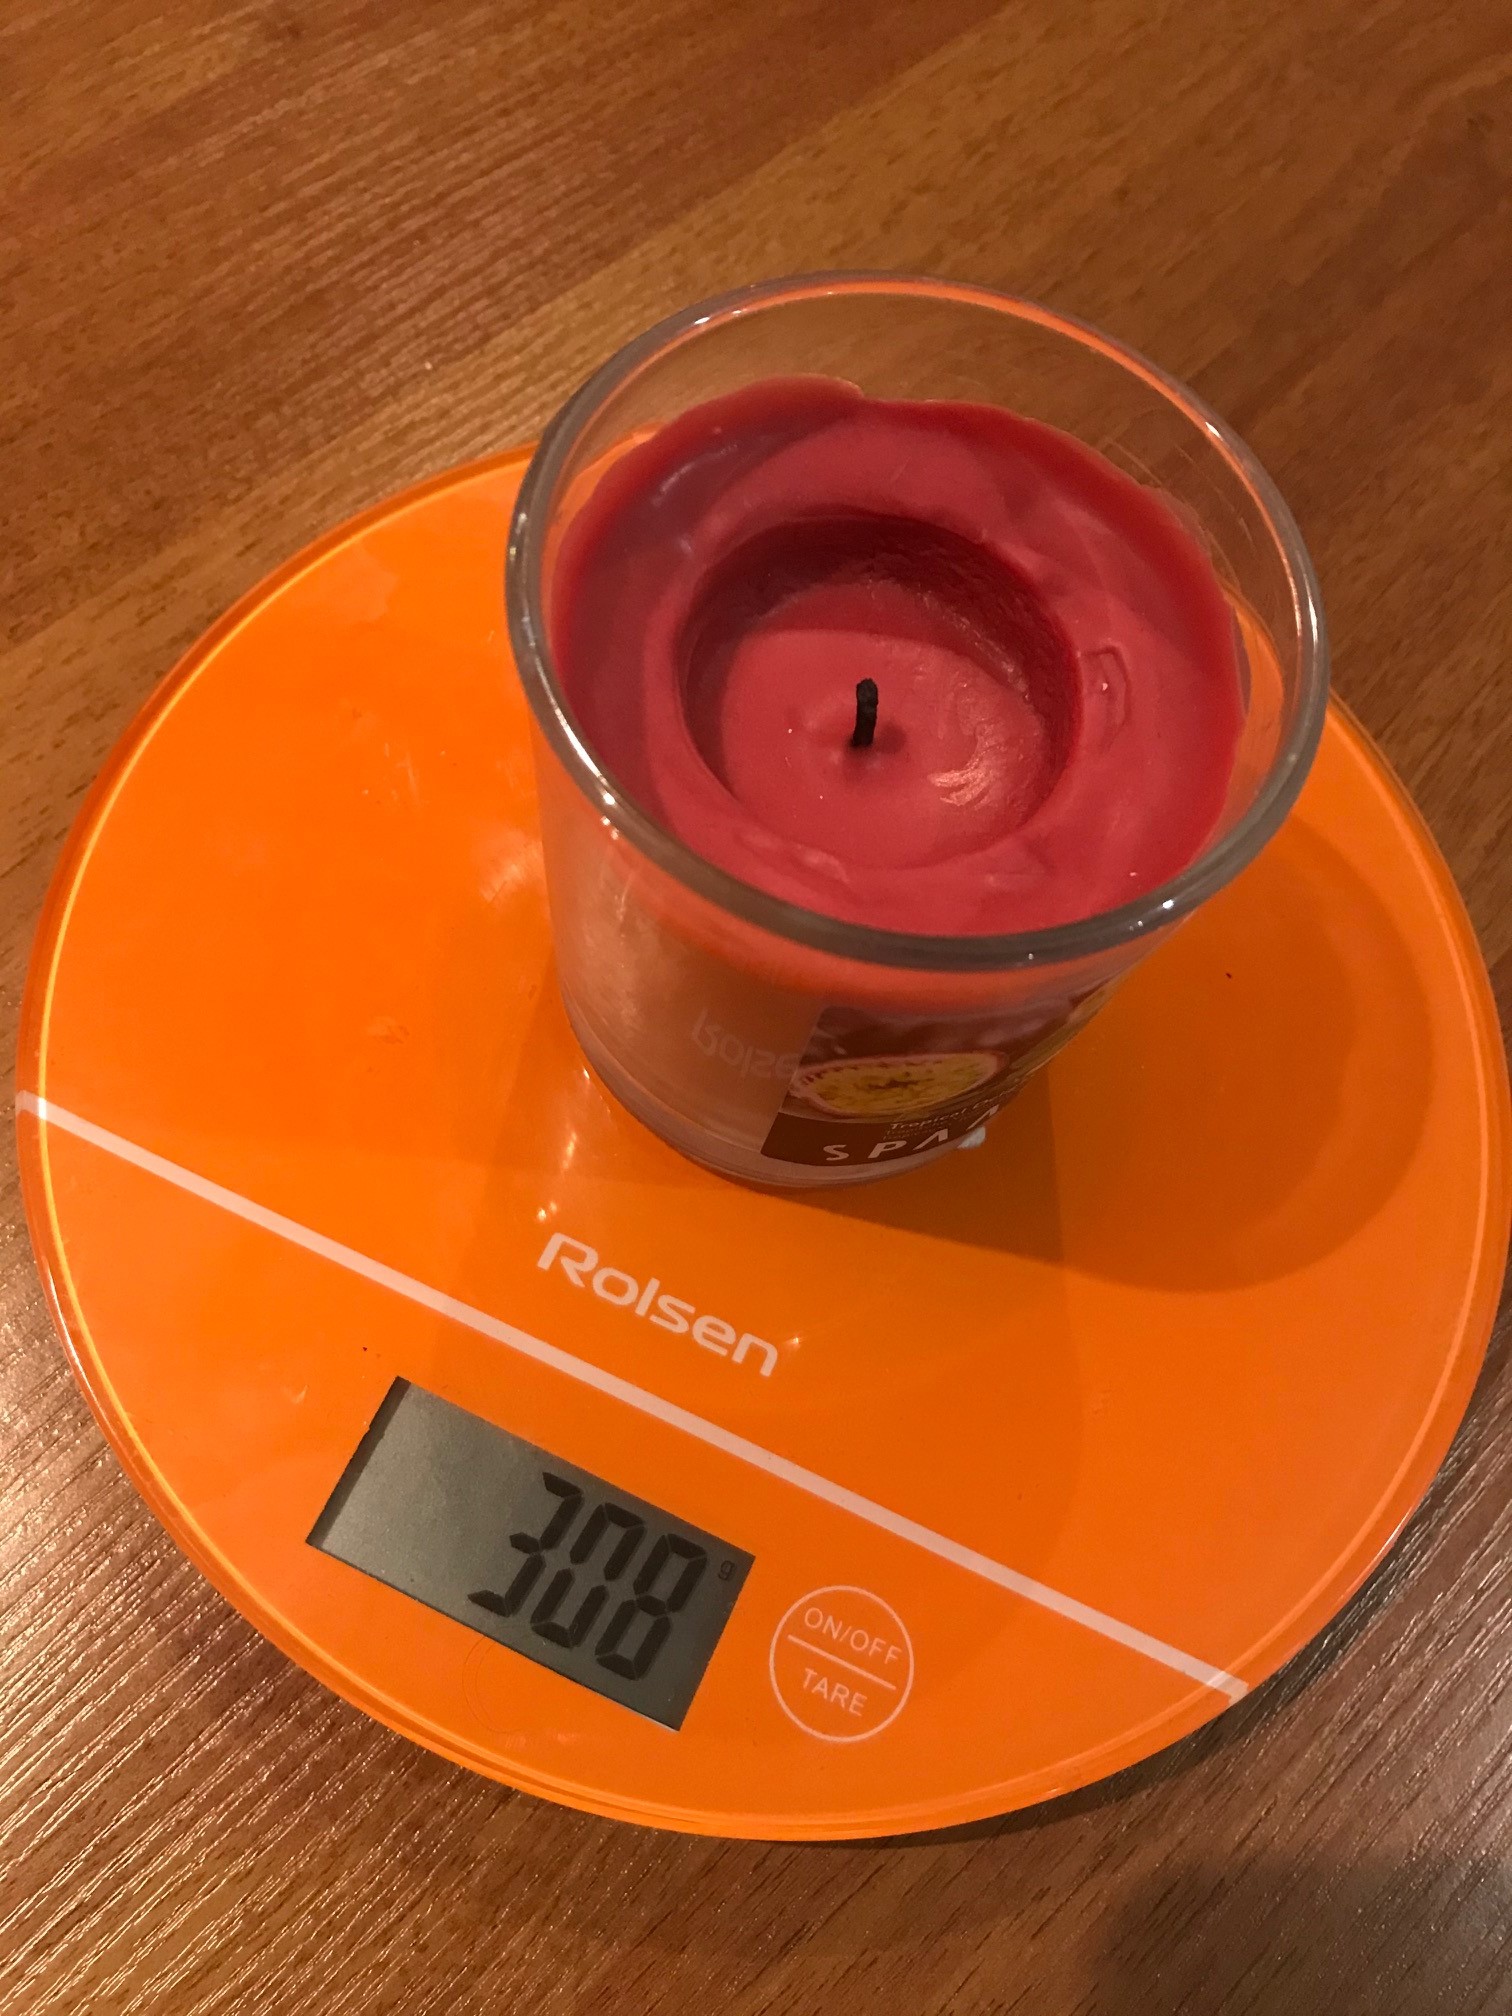 ikea candle weight